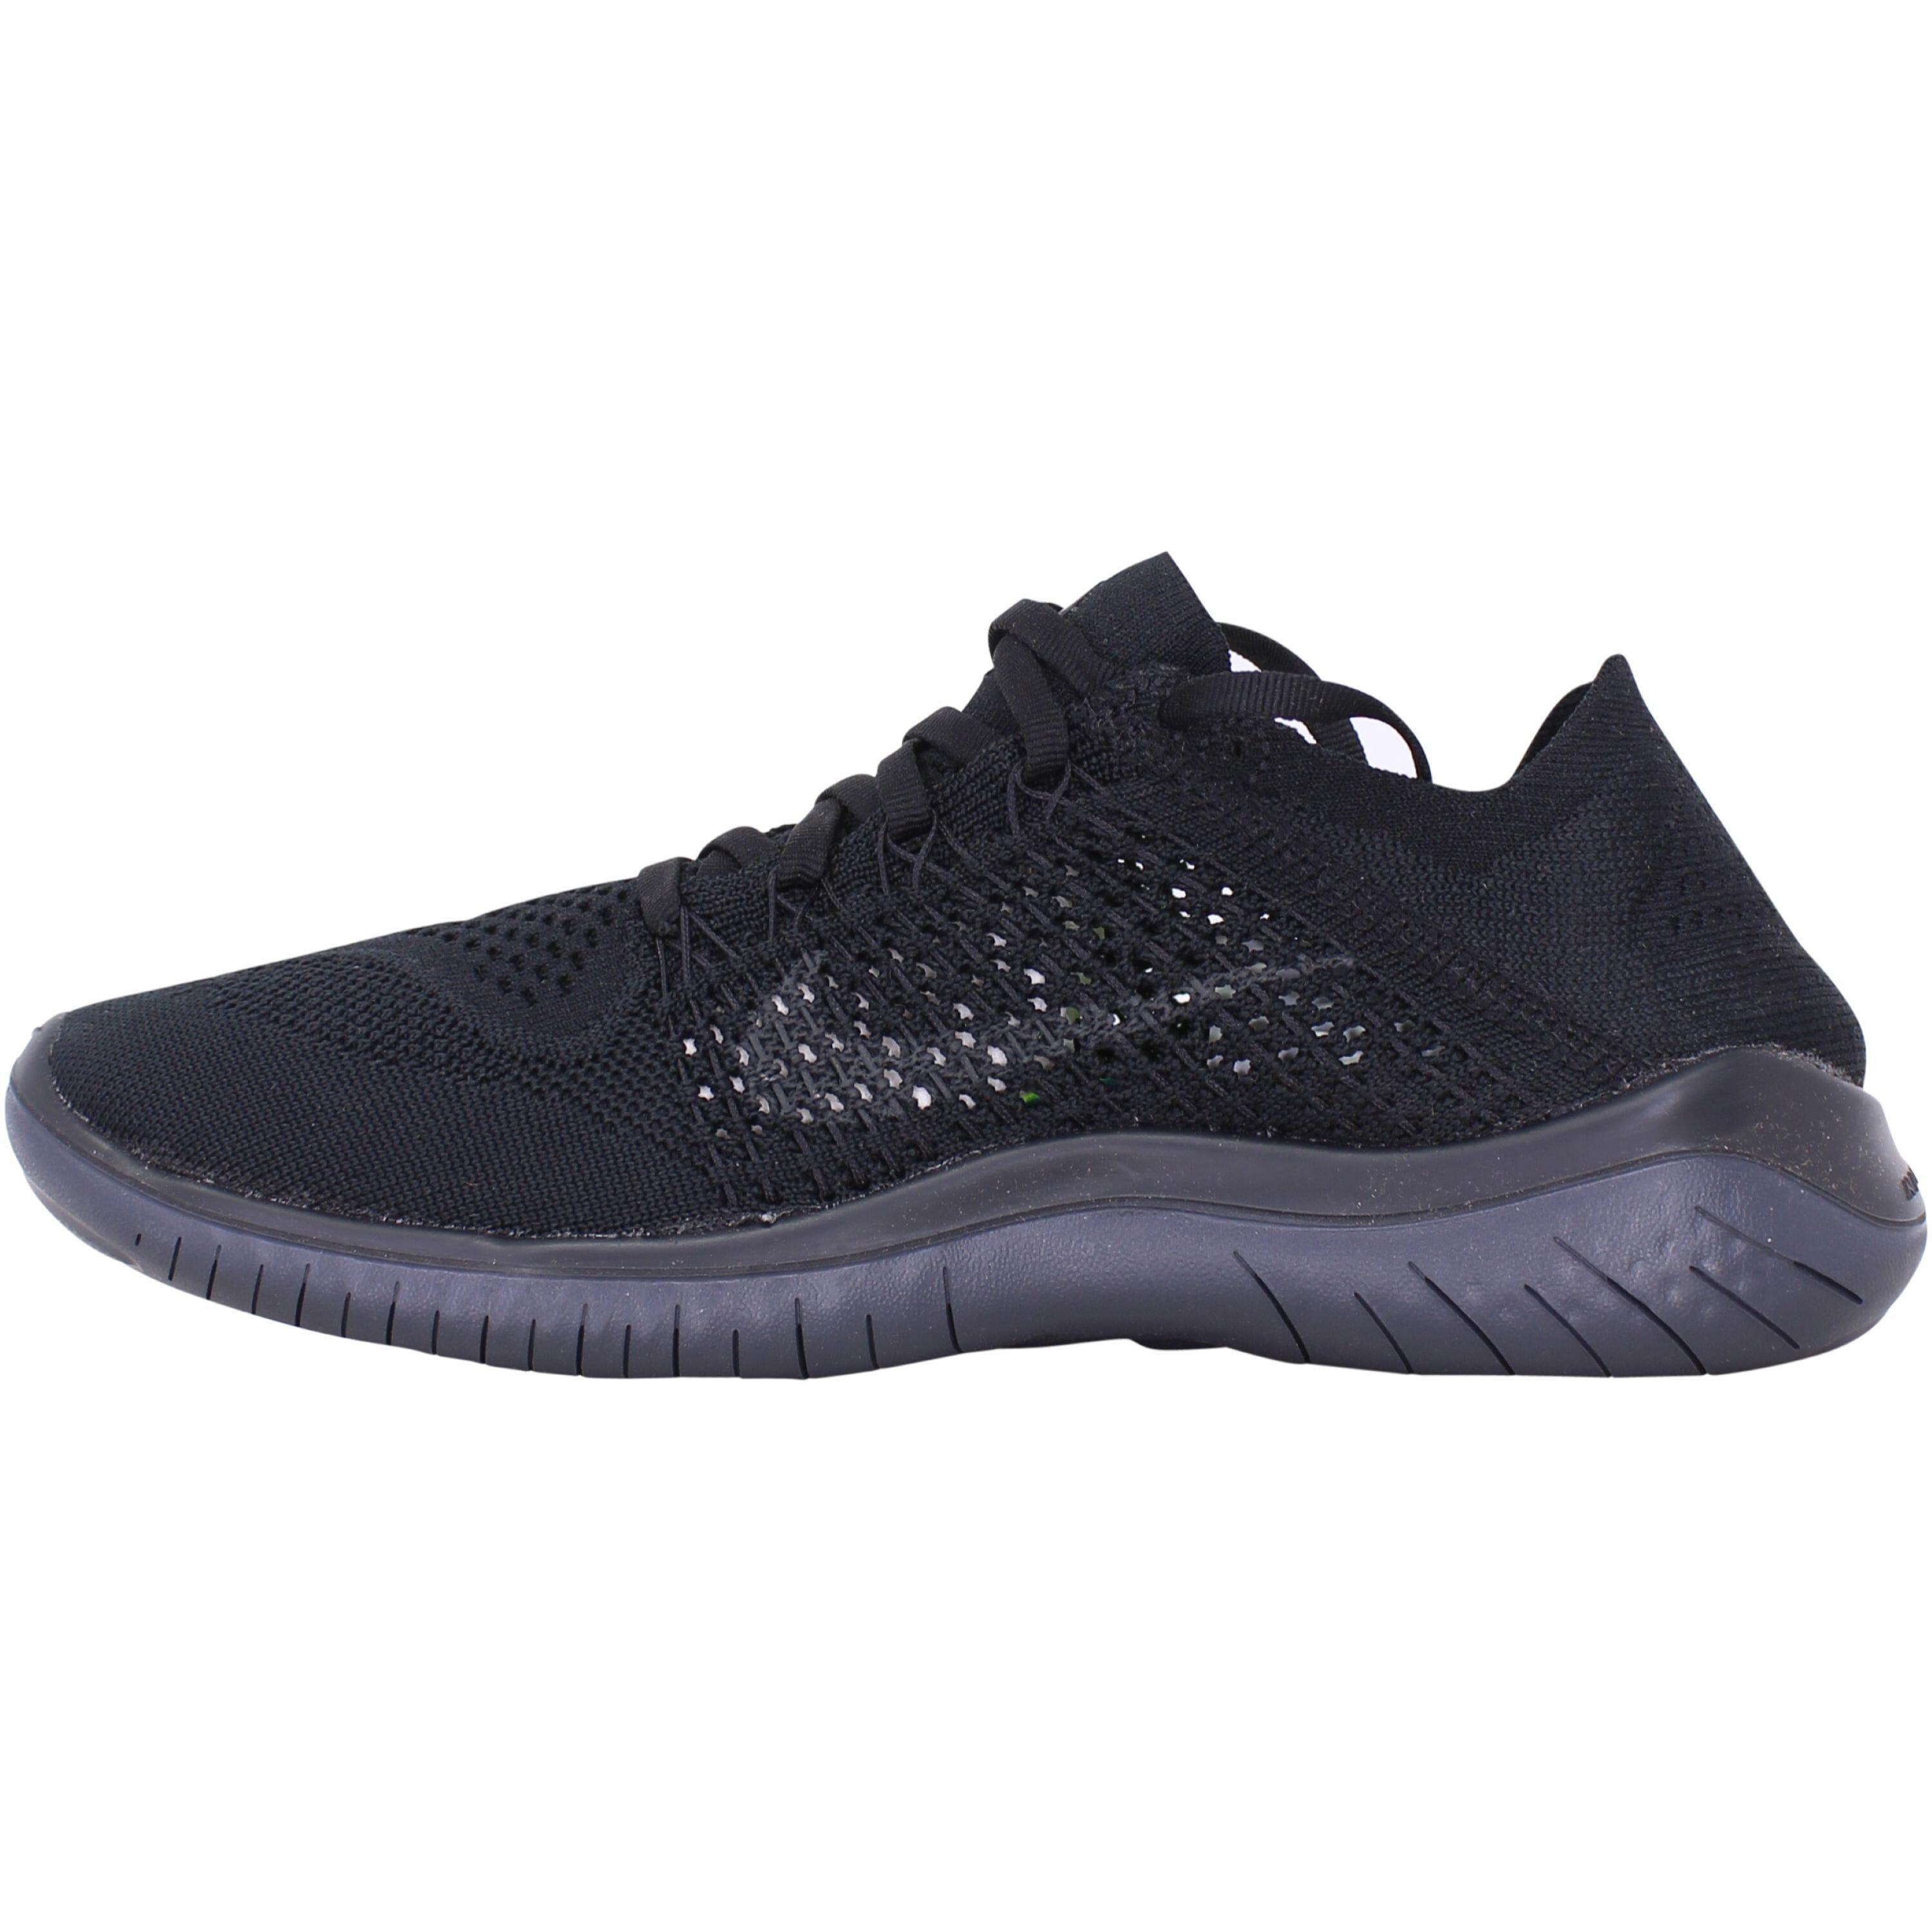 Microbio construir césped Nike Free Rn Flyknit 2018 /anthracite 942839-002 in Blue | Lyst